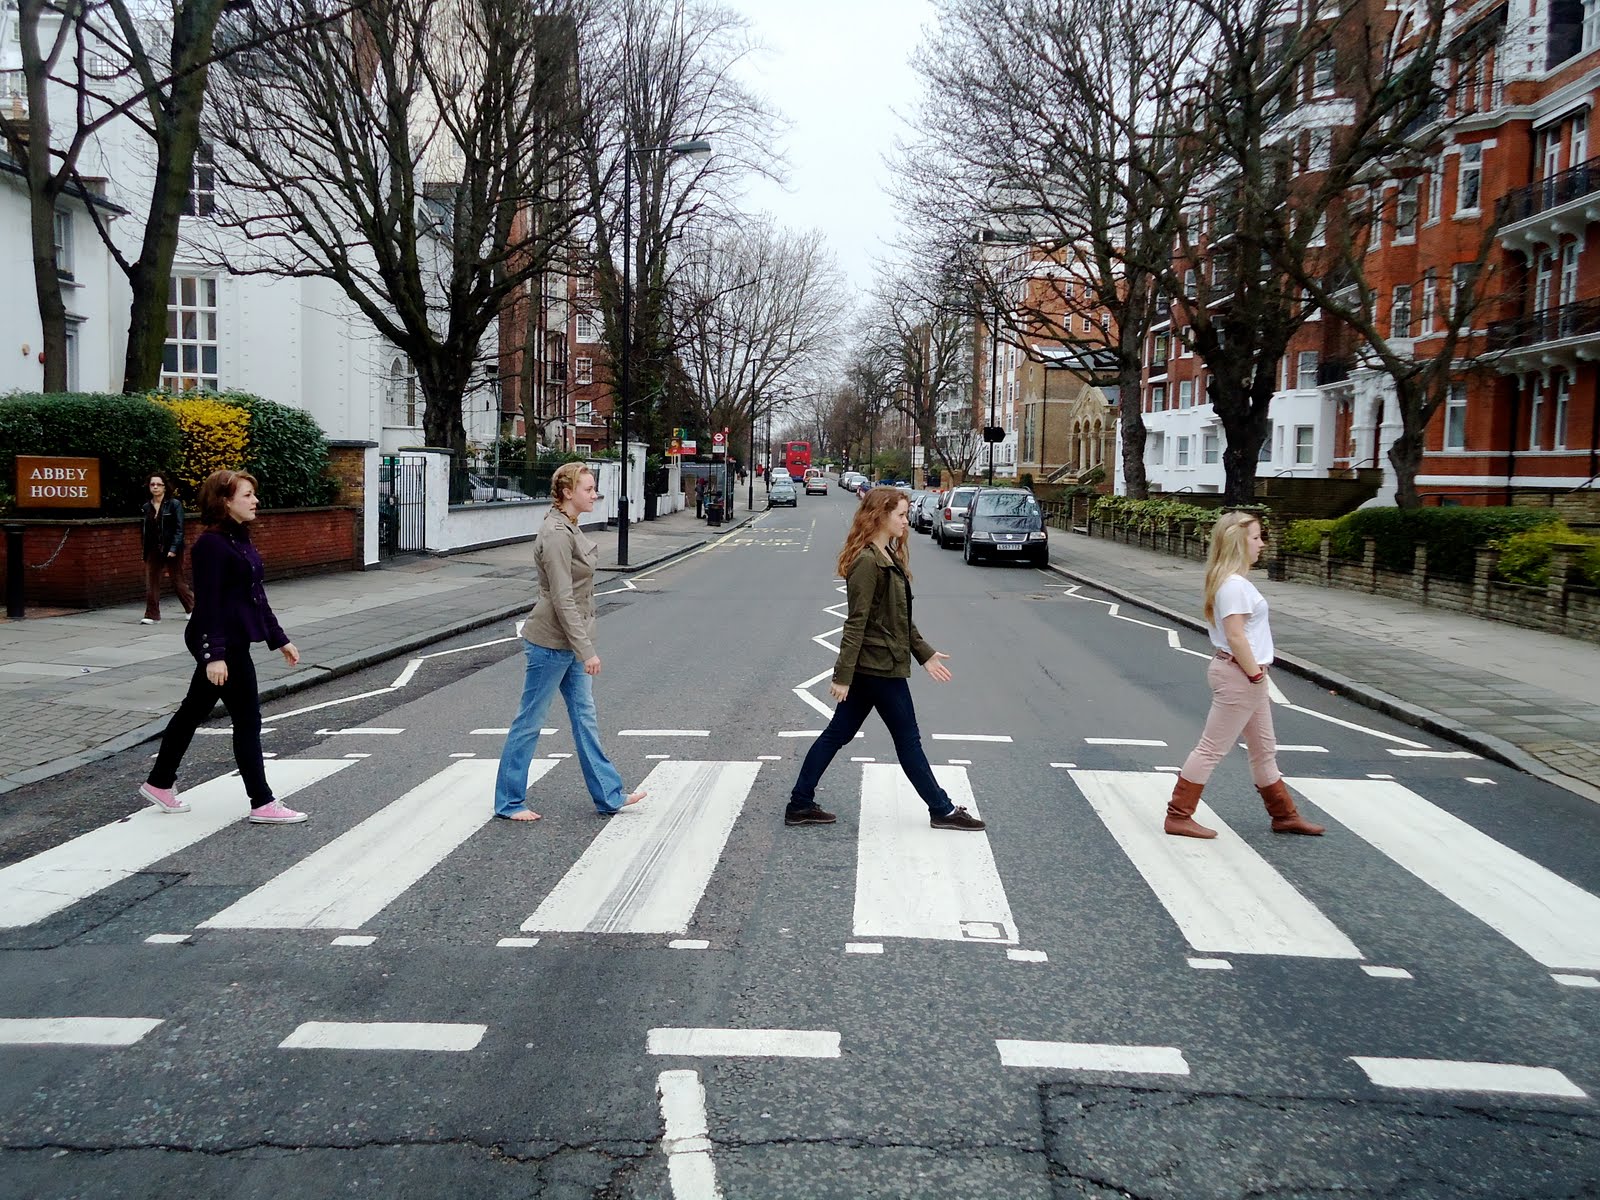 We woke up super early to go to Abbey Road this morning. 